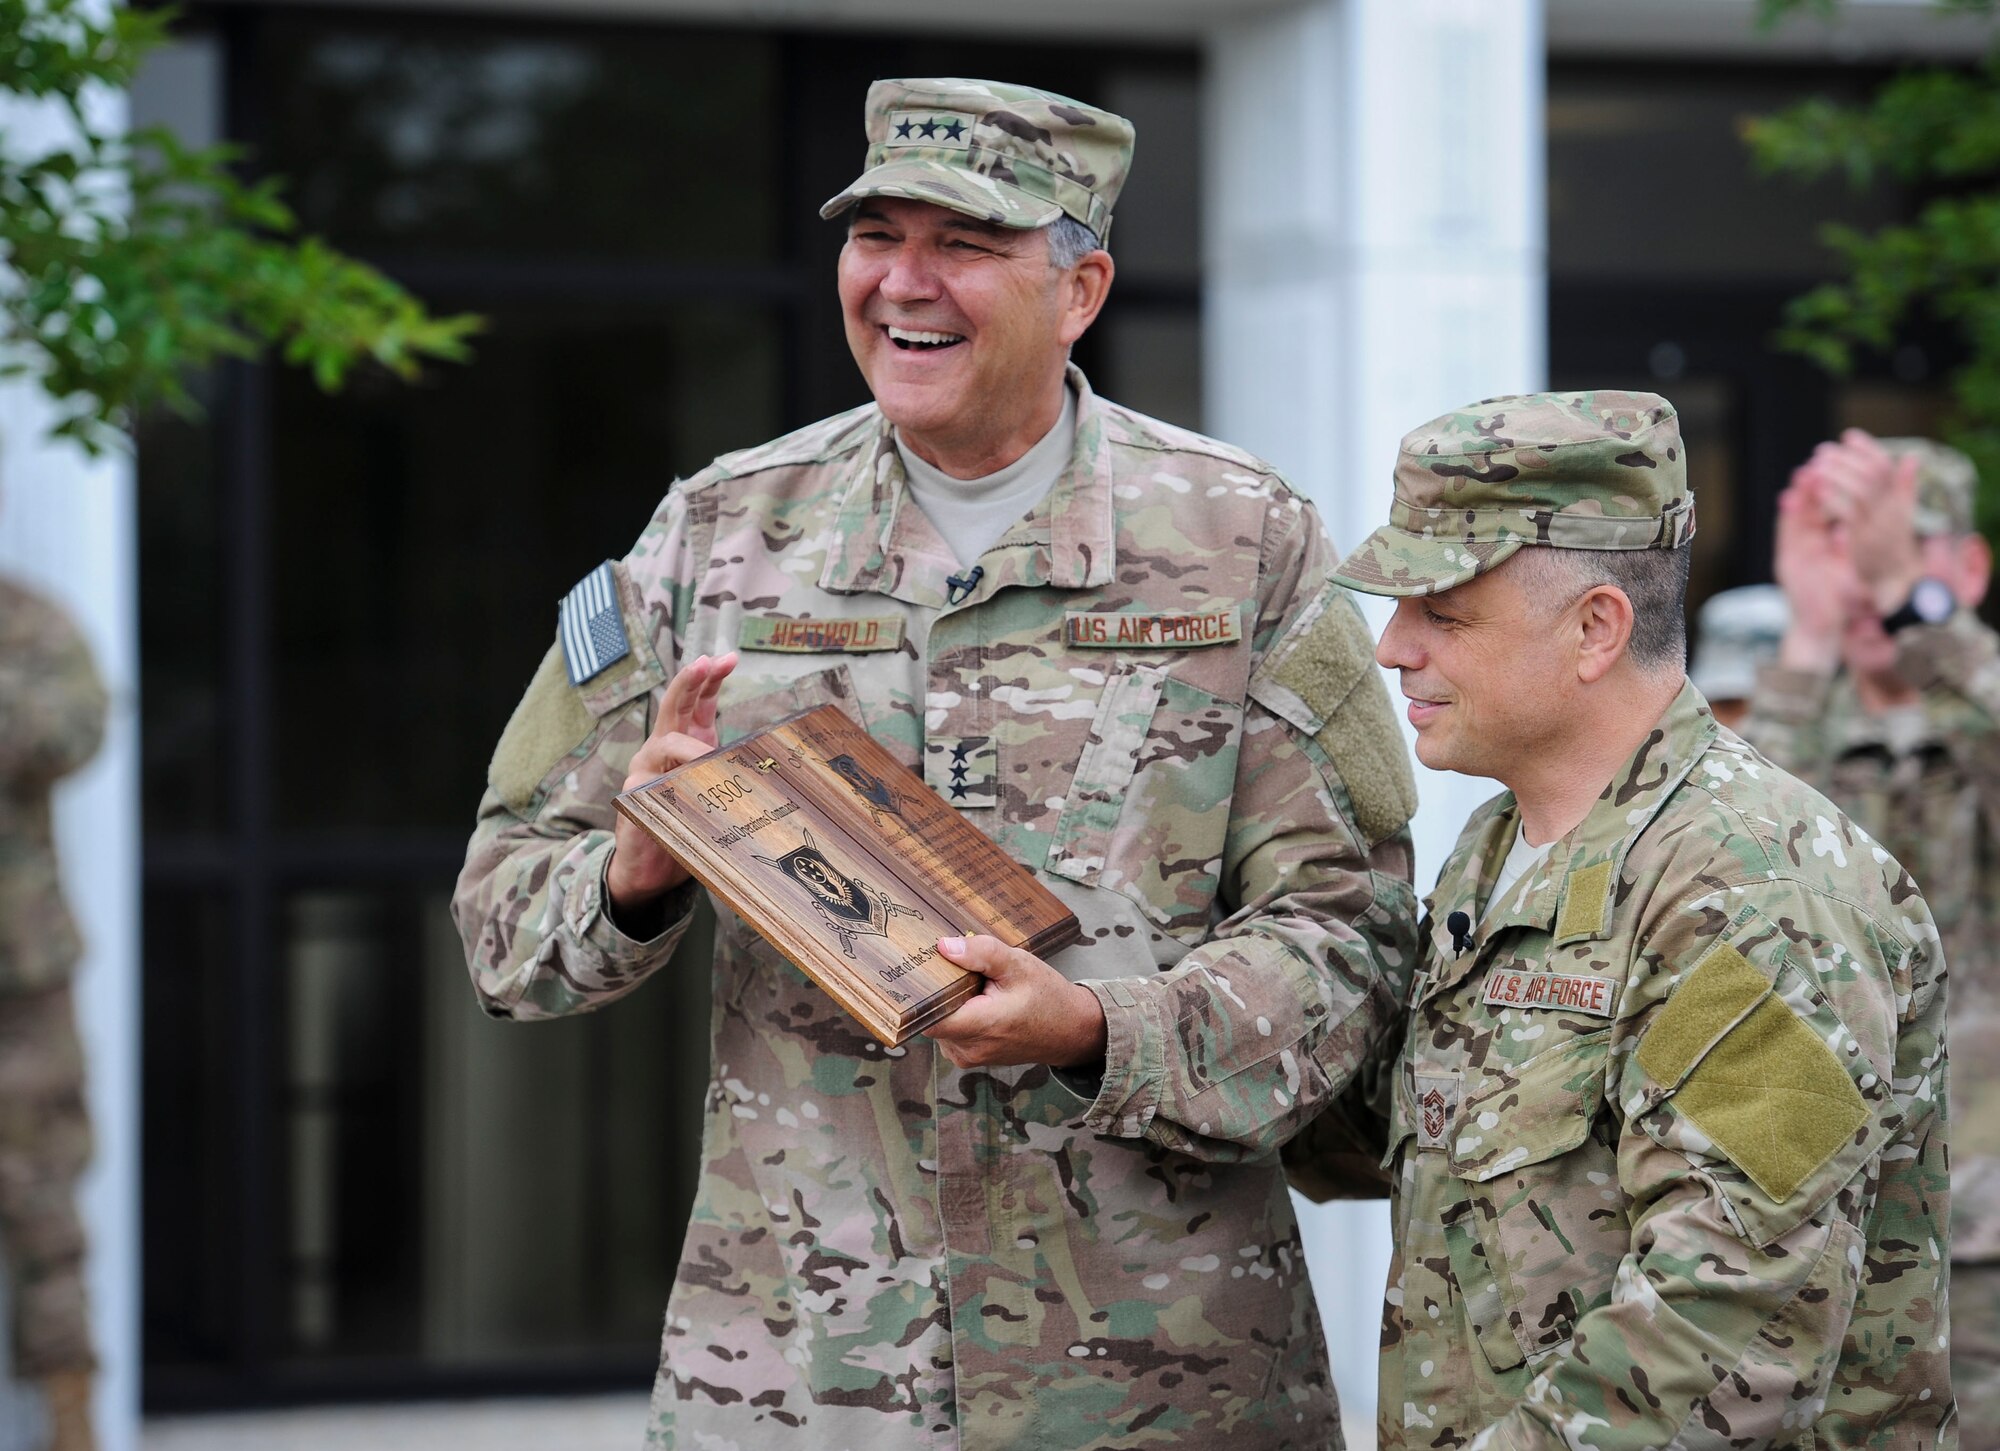 Lt. Gen. Brad Heithold, commander of Air Force Special Operations Command, accepts his Order of the Sword invitation from Chief Master Sgt. Matt Caruso, AFSOC command chief, at Hurlburt Field, Fla., May 2, 2016. The Order of the Sword is the highest award the enlisted corps can bestow upon an officer, draws its heritage from military tradition where non-commissioned officers honor leaders who have made significant contributions to the enlisted corps. Heithold will be inducted Nov. 18, 2016 here. (U.S. Air Force photo by Senior Airman Meagan Schutter)